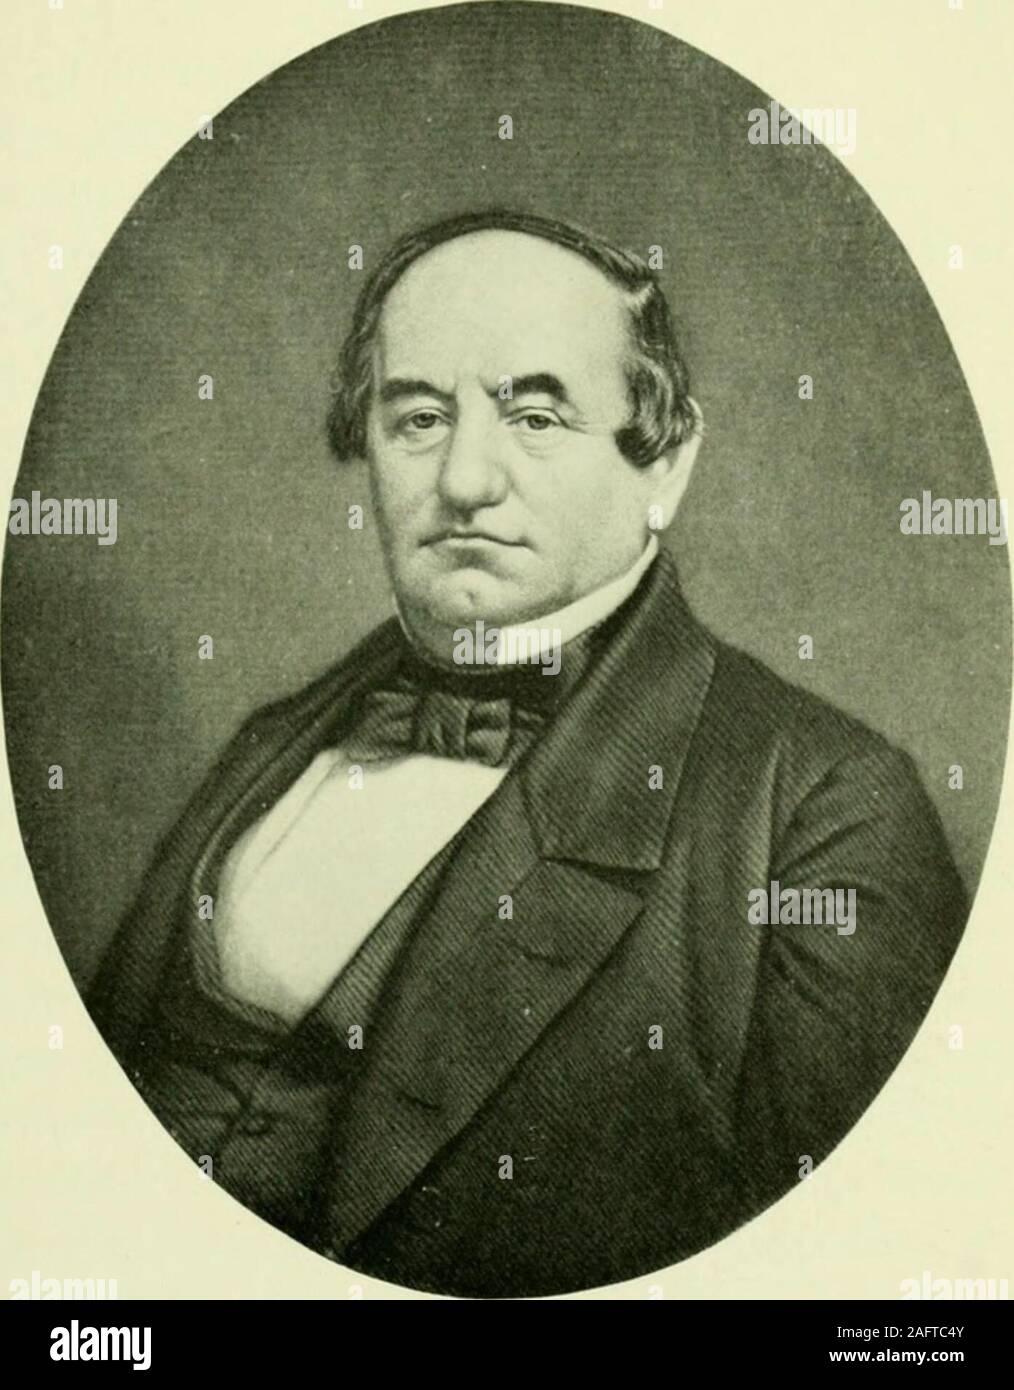 . History of the state of New York, political and governmental;. on intervened with a protest, on the groundthat if McLeod had really done as he boasted he had,he had been a member of the organized and armedforces of the British crown and had acted under thedirection of superior officers. The British ForeignMinister, Lord Palmerston, intimated that McLeodsconviction and execution might prove to be a cause ofwar between Great Britain and the United States, andDaniel Webster, Secretary of State at Washington,argued that if McLeod was to be tried at all he shouldbe brought before a Federal and no Stock Photo